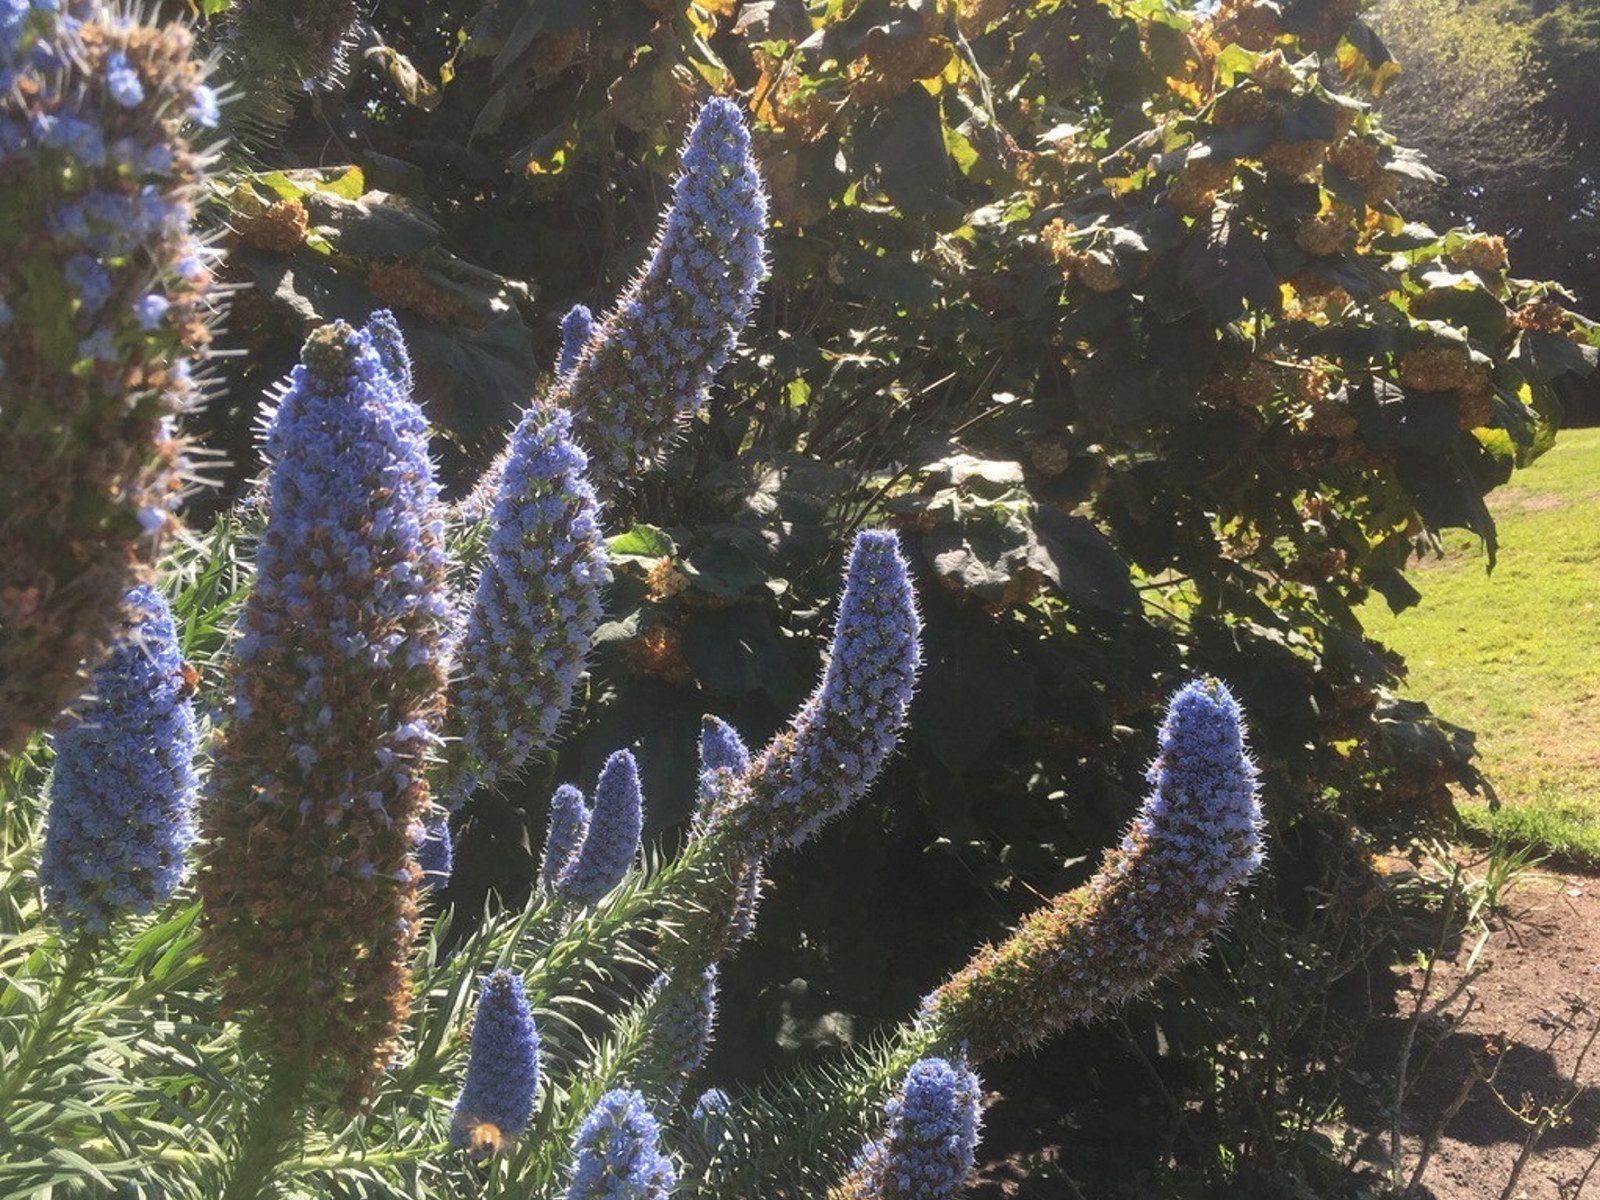 The Pride of Madeira in the pleasure at Vaucluse House shows of its blue flower spikes